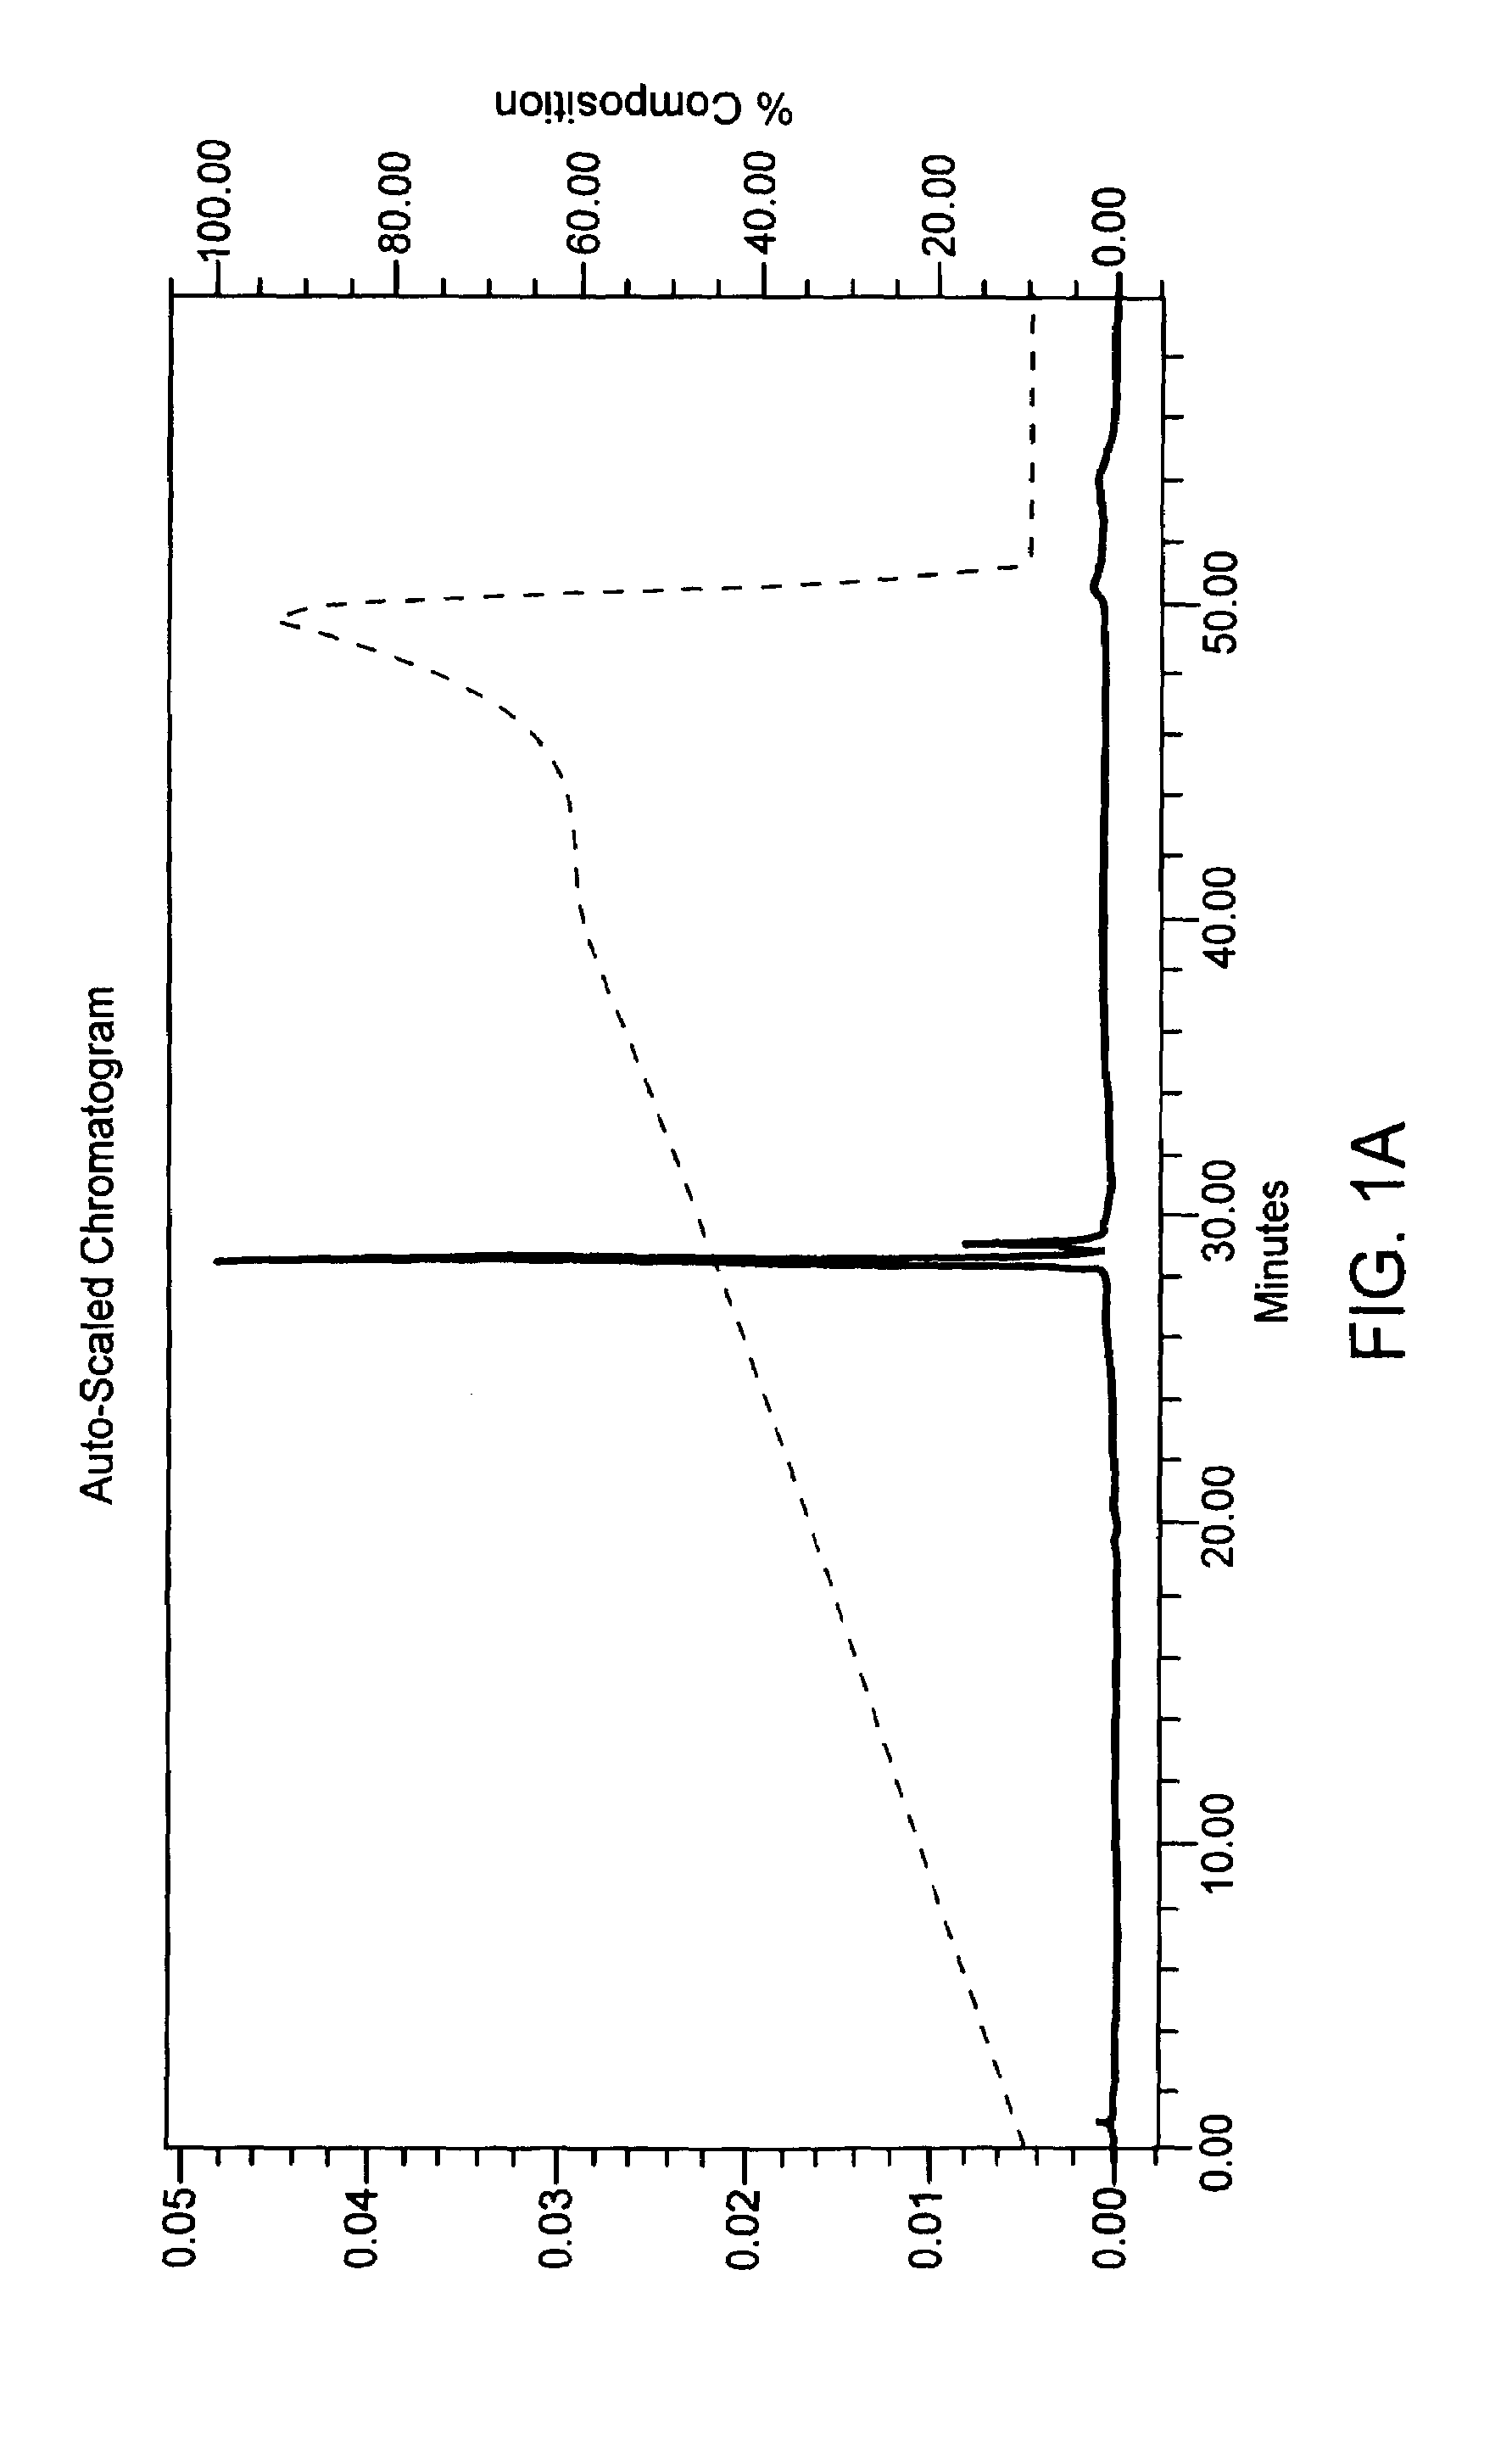 Method of preventing modification of synthetic oligonucleotides